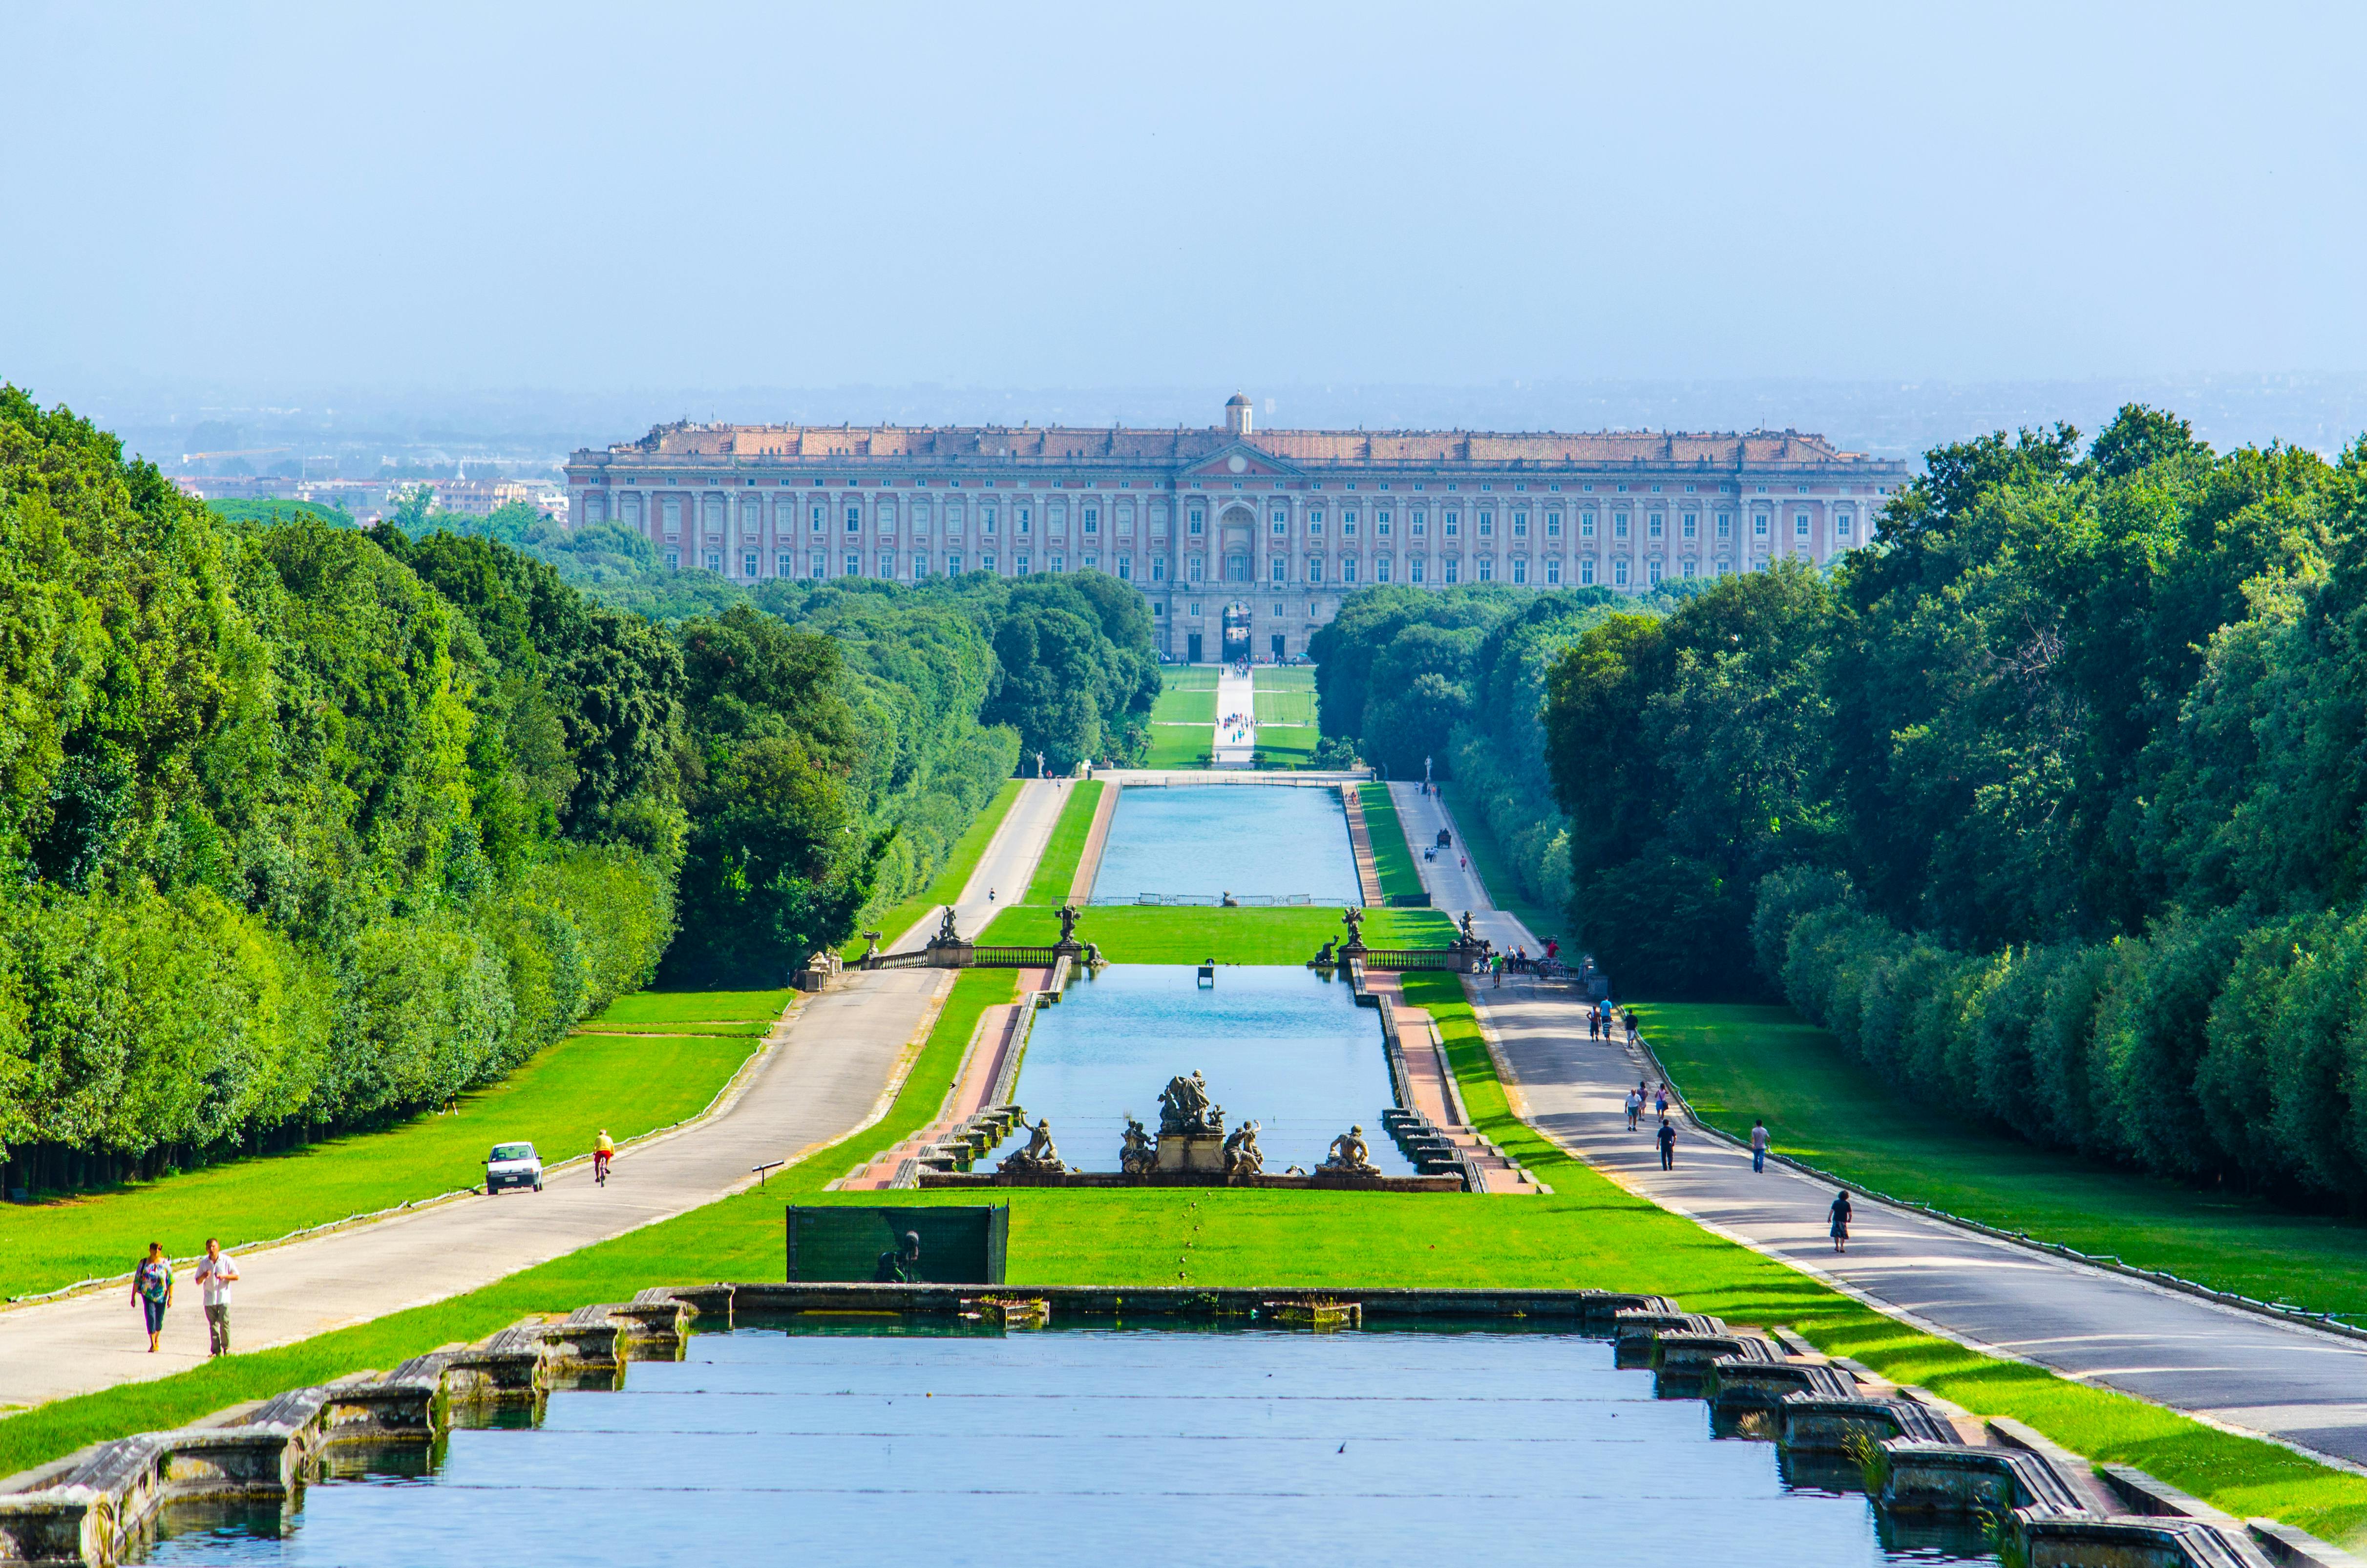 Tickets of the Royal Palace of Caserta with guided tour